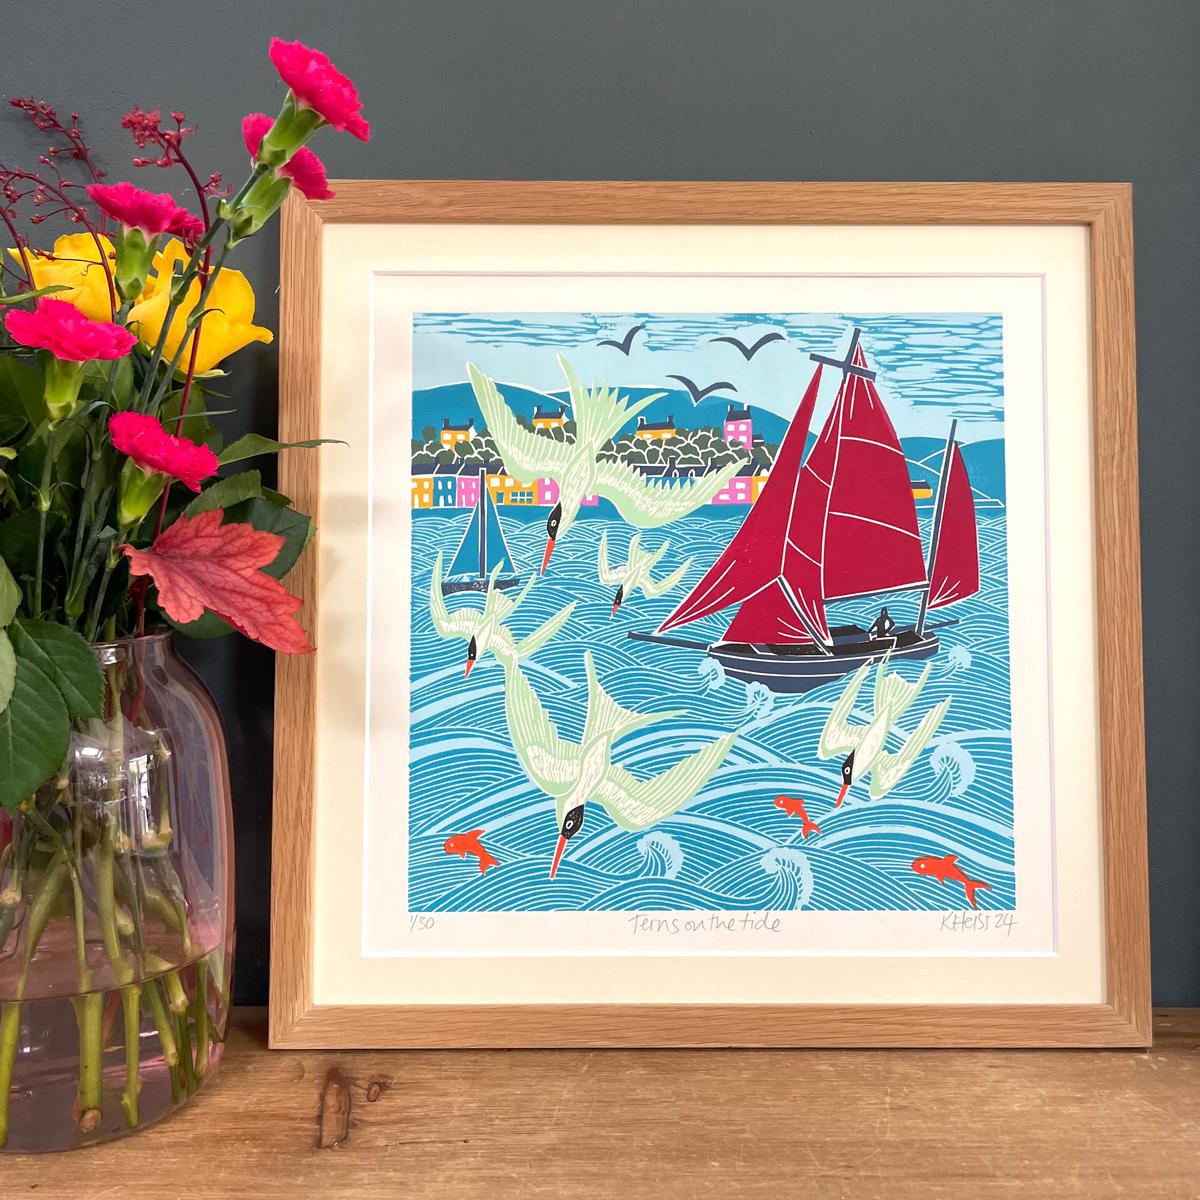 This Linocut print captures the energy and speed of terns fishing on the high tide with sailing boats riding the waves. Printed with oil based relief inks on 300gsm soft white Somerset velvet paper. A Linocut Print is a relief printing technique